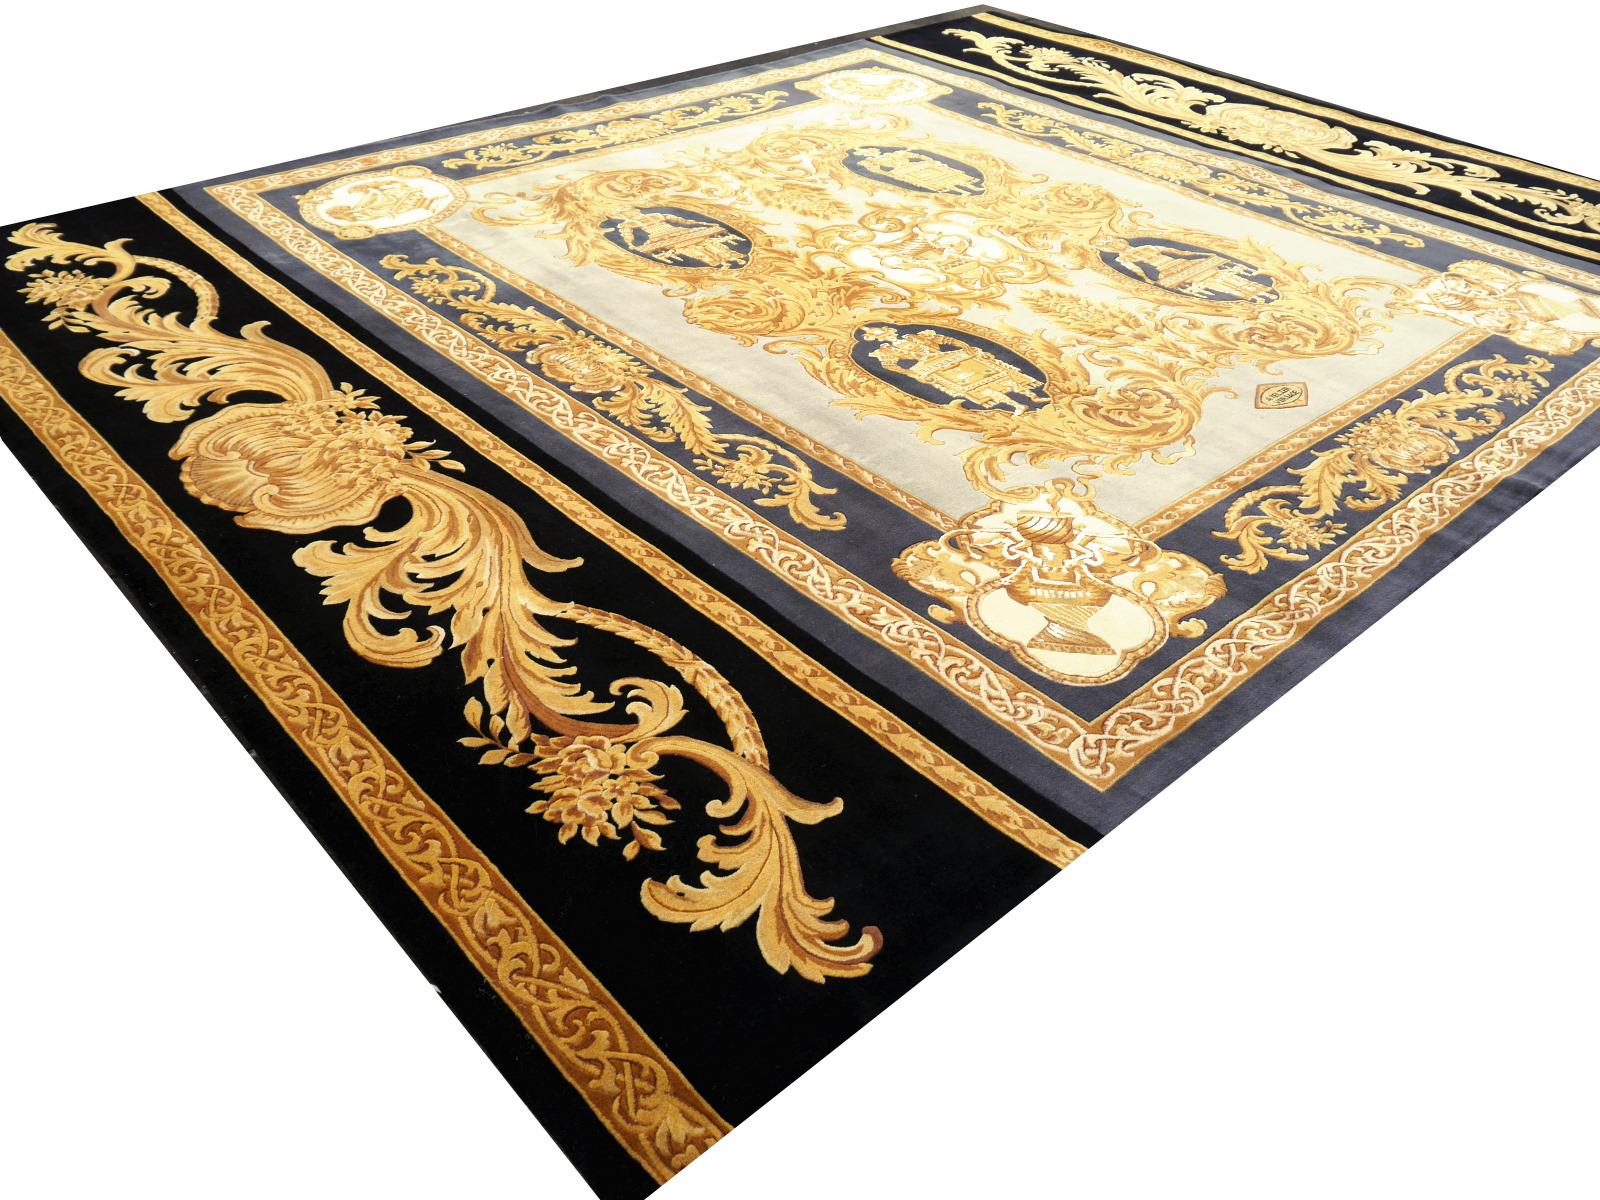 Wool Gianni Versace Rug Home Signature Collection Black Gray Gold Rare Large Size